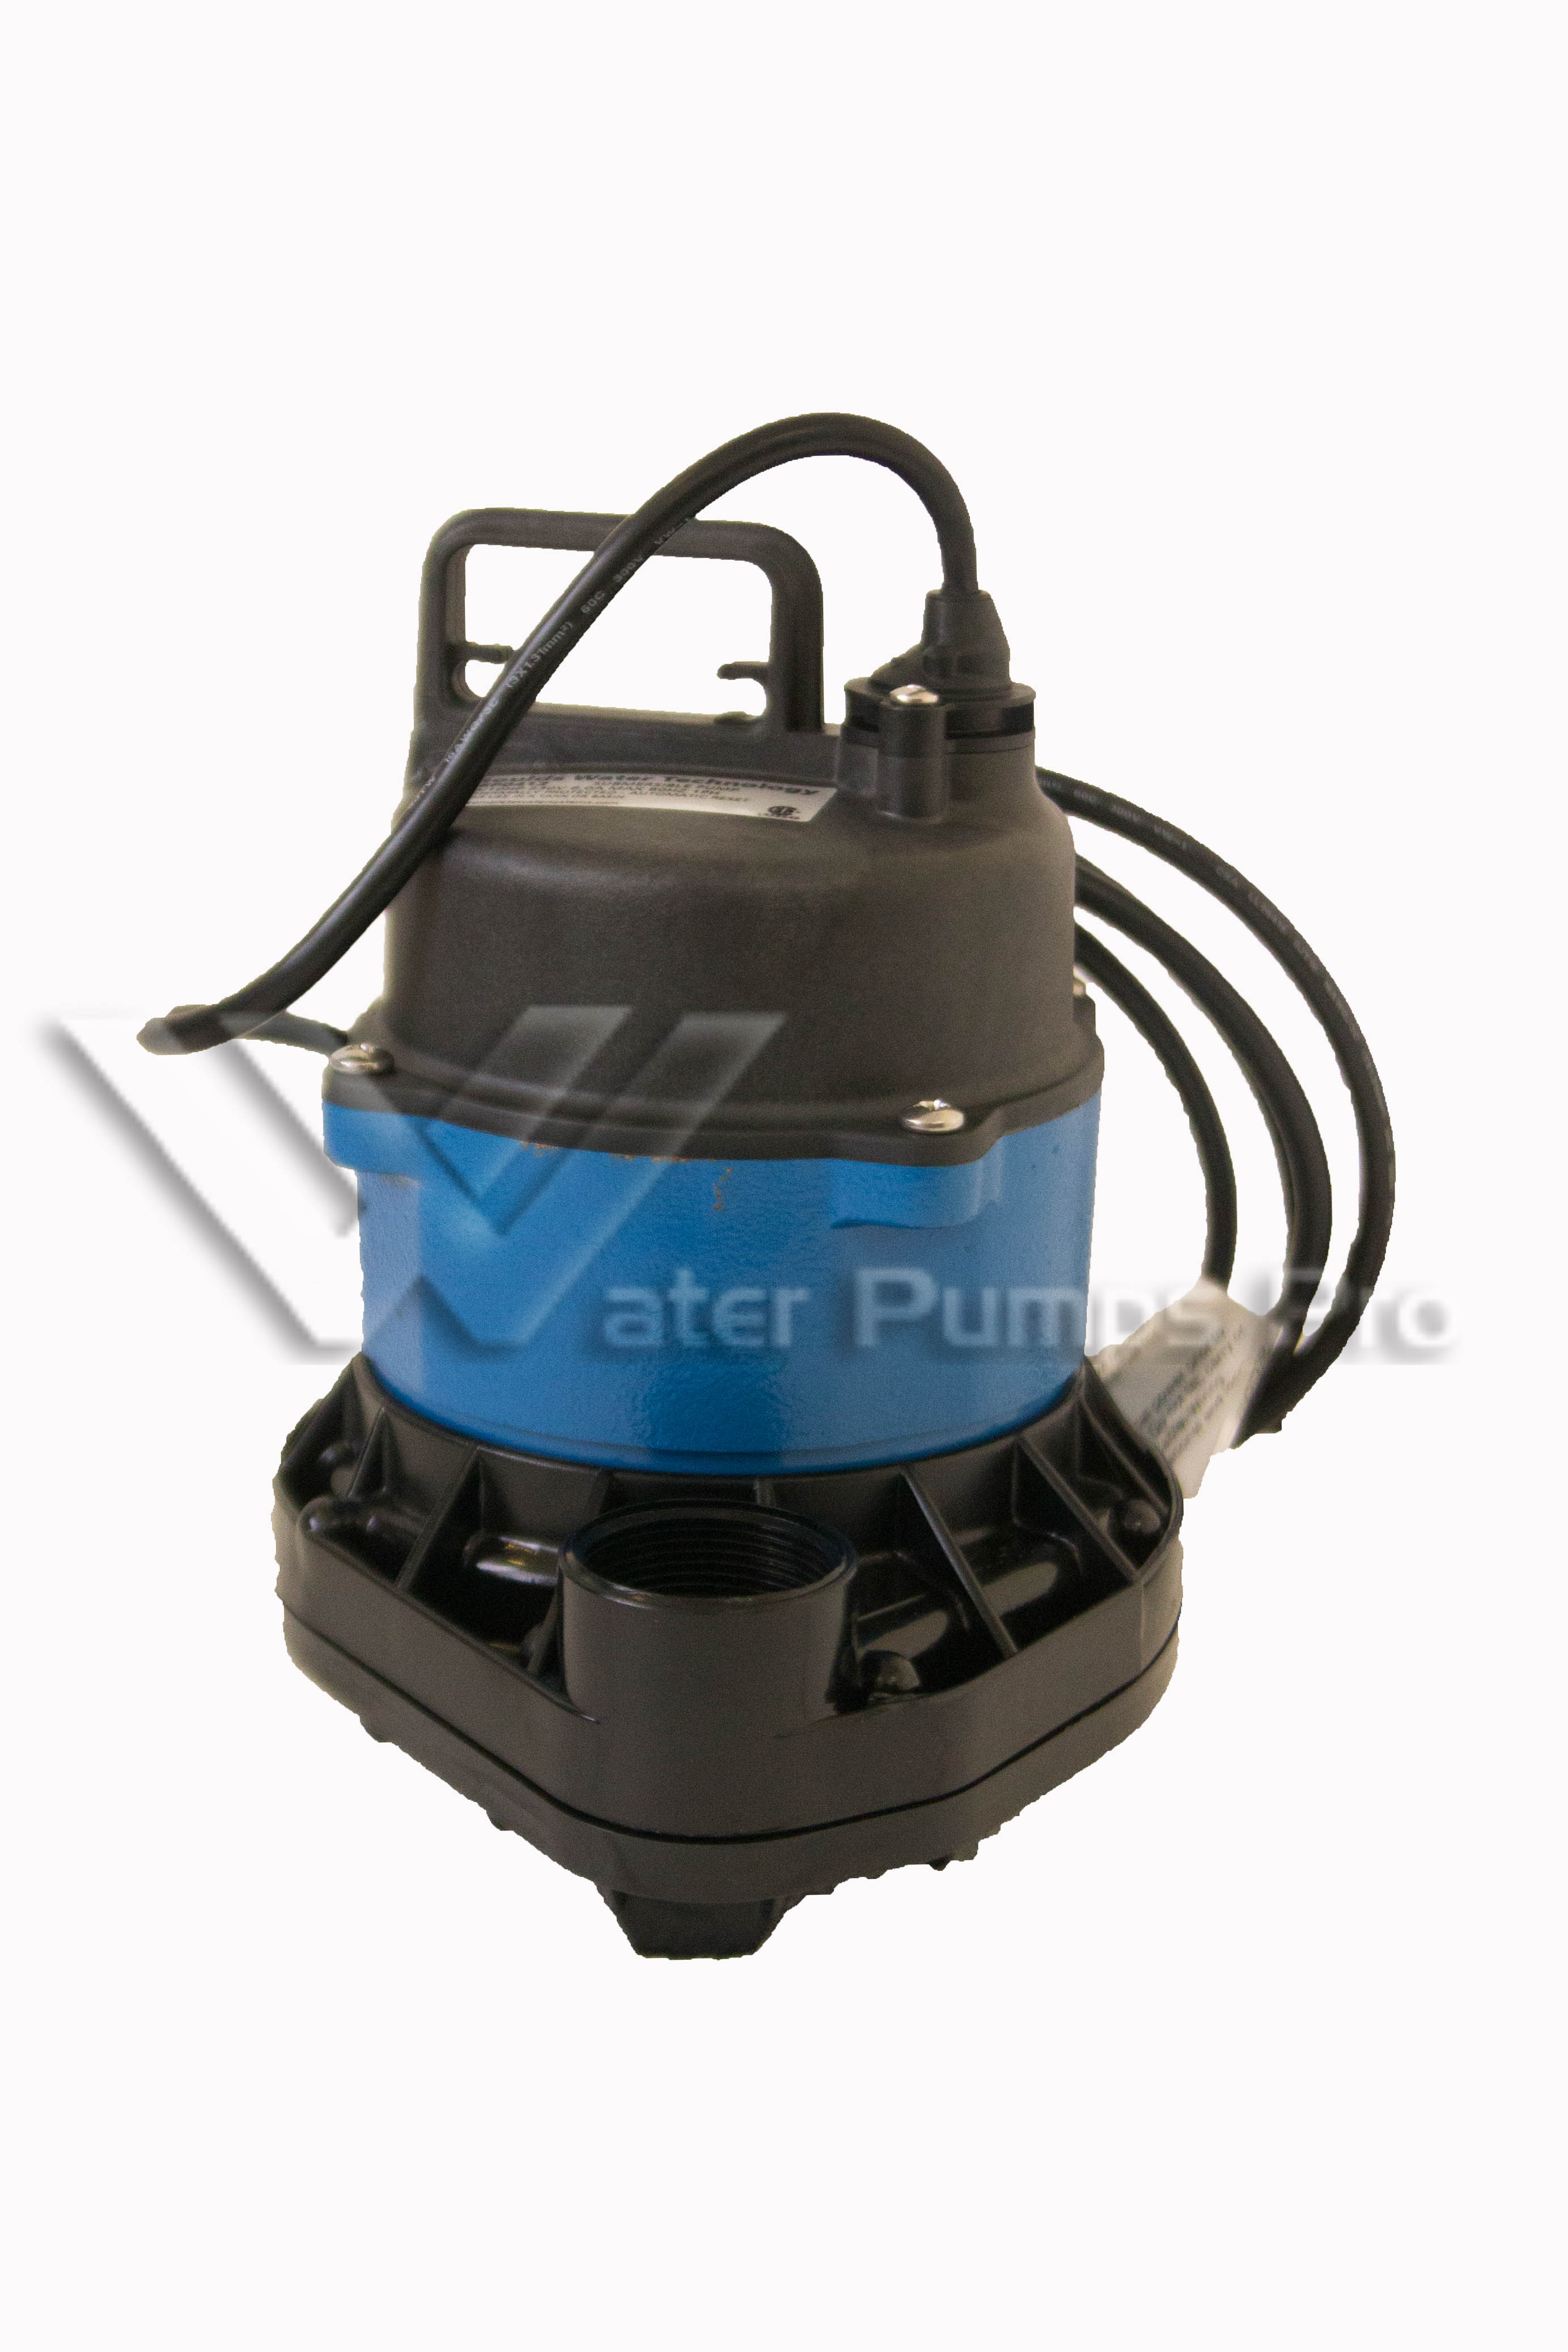 Goulds EP0412 4/10HP 230V Submersible Effluent Pump - Click Image to Close